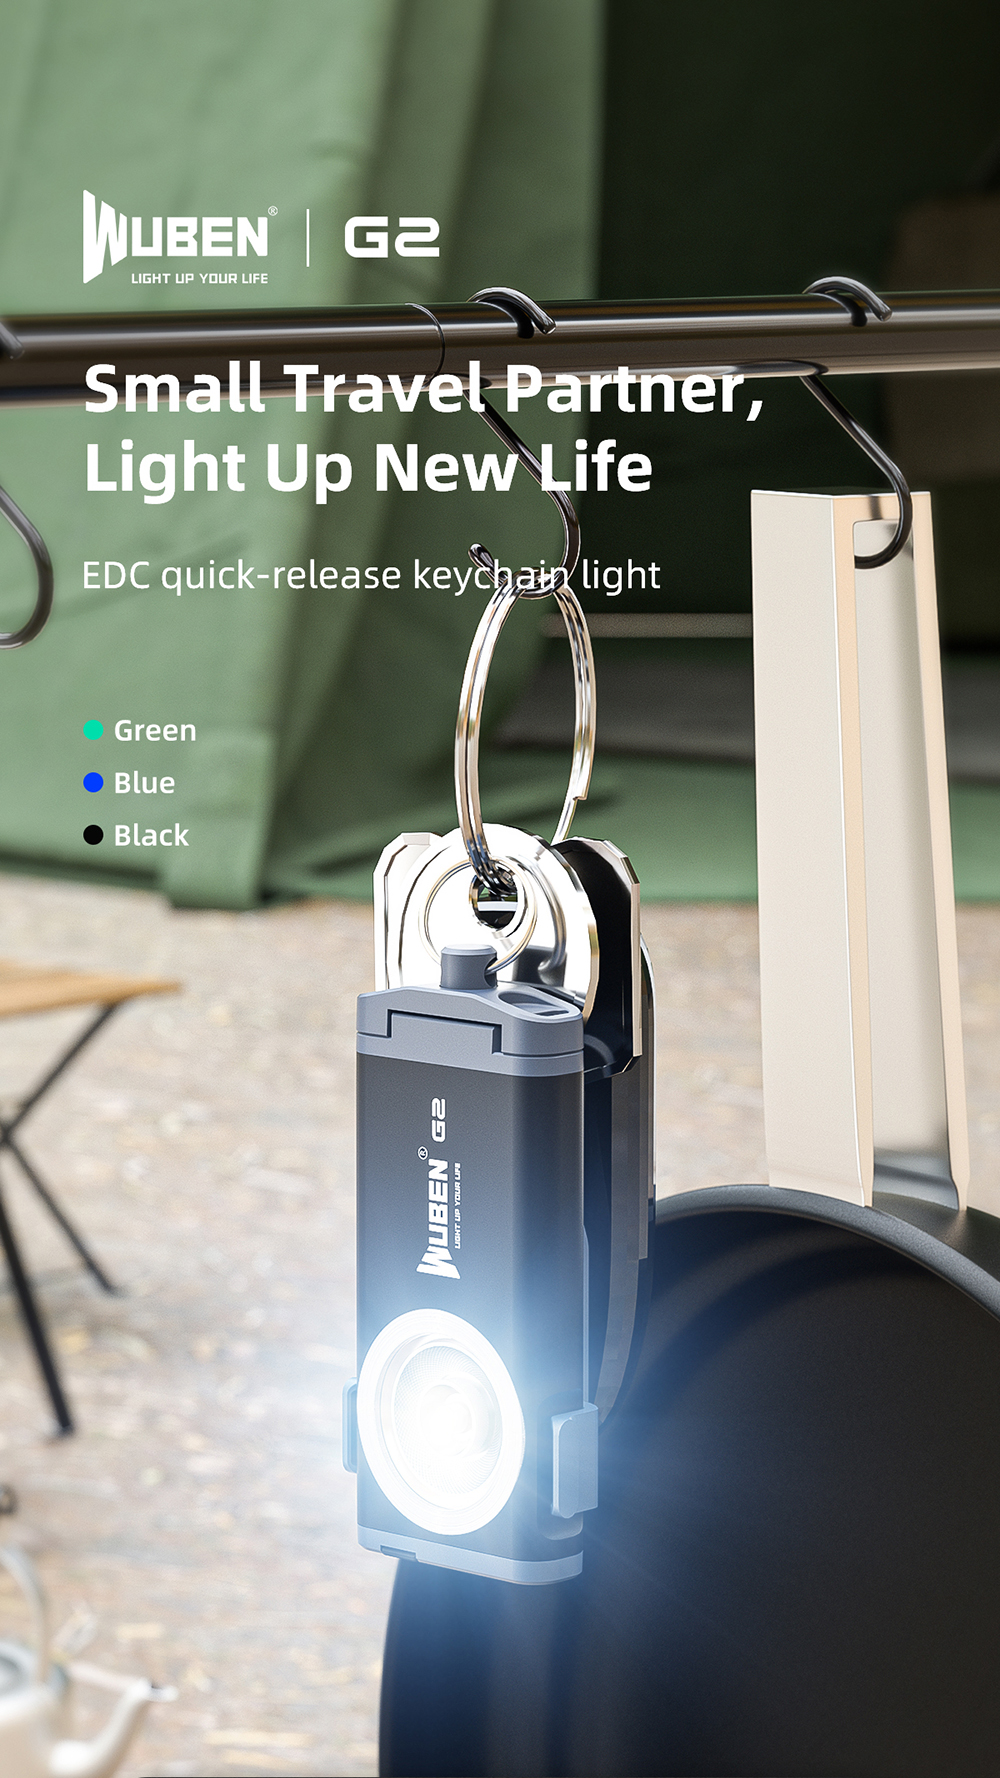 WUBEN-G2-P9-500LM-Quick-release-EDC-LED-Keychain-Flashlight-Magnetic-Tail-Type-C-Charging-Super-Wide-1943458-1